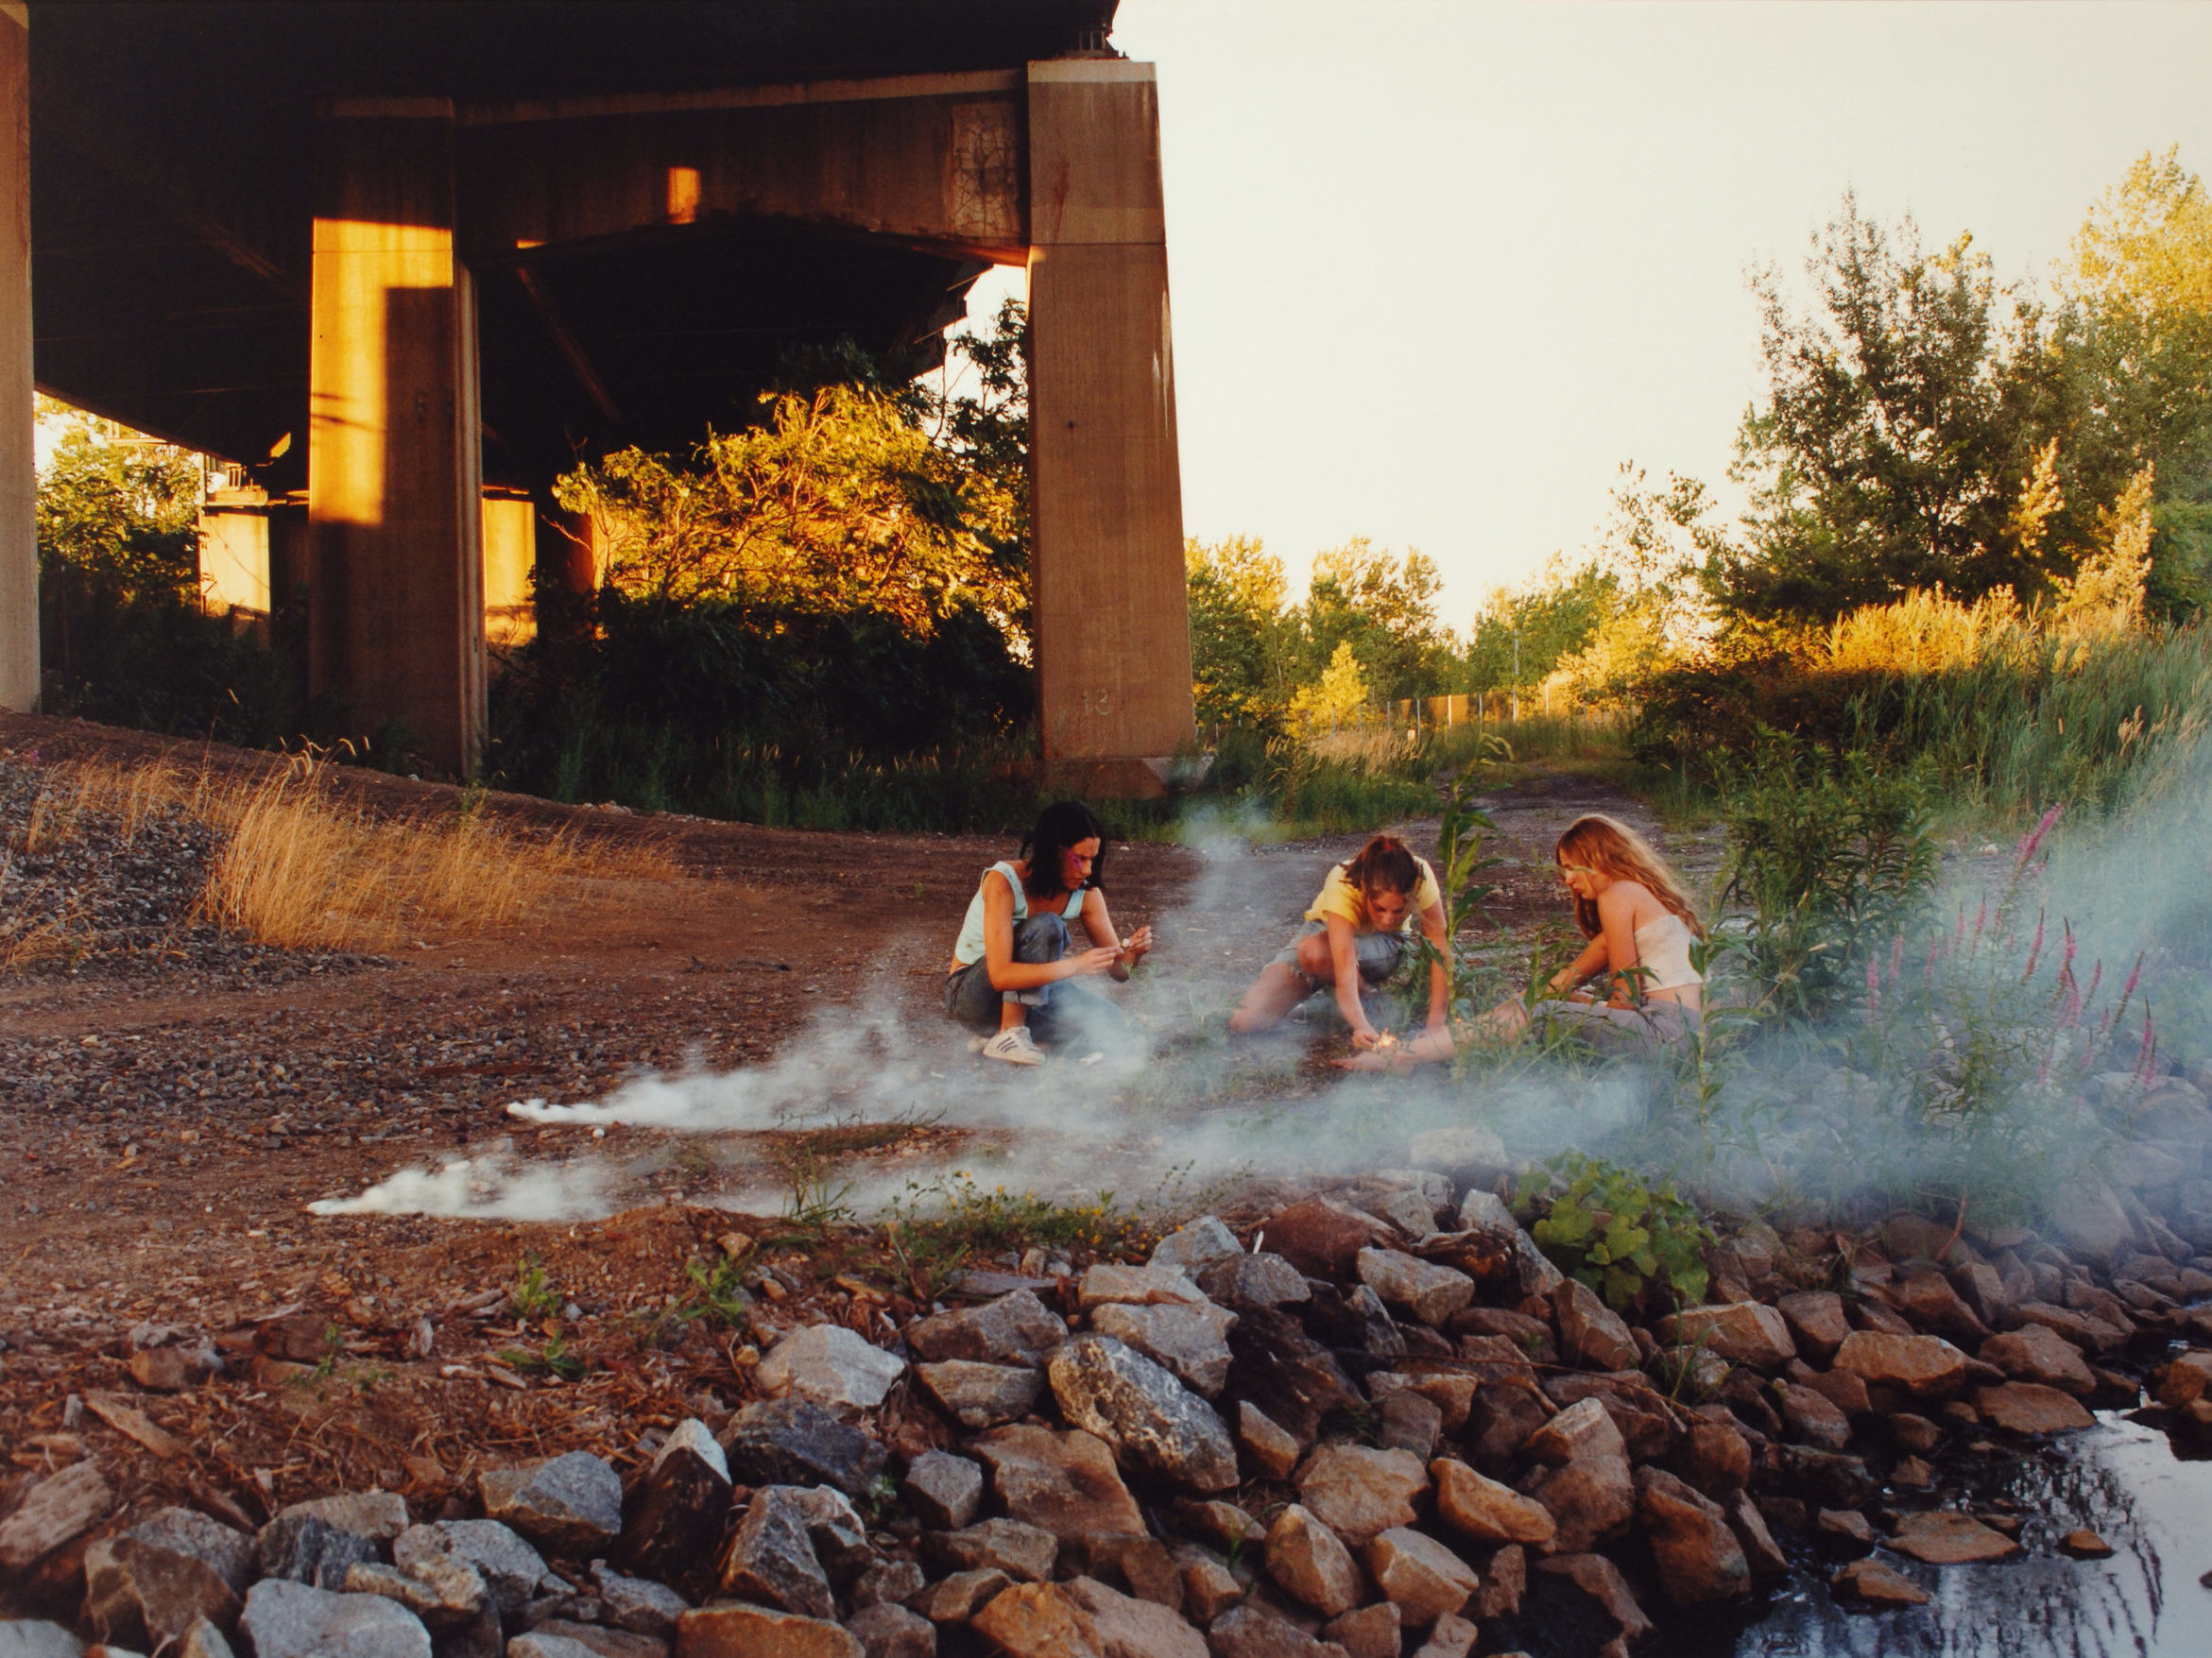 Crouching in the shadow of a highway overpass, three teenage girls with light skin focus intently on lighting smoke bombs.